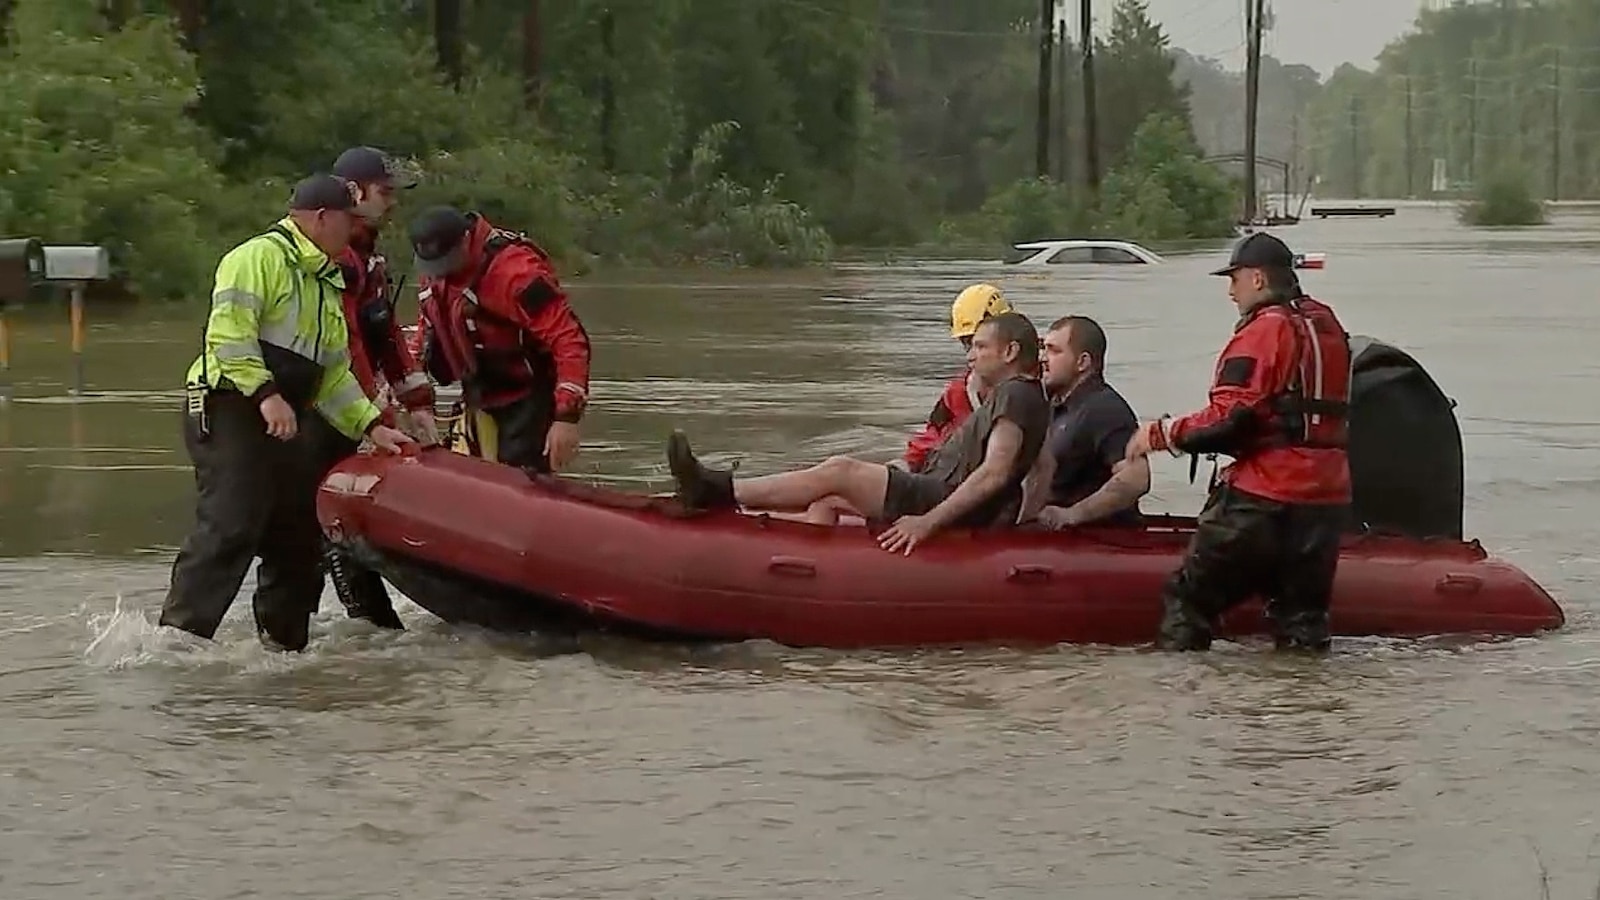 Houston area facing 'catasrophic' flood conditions as severe weather pummels Texas